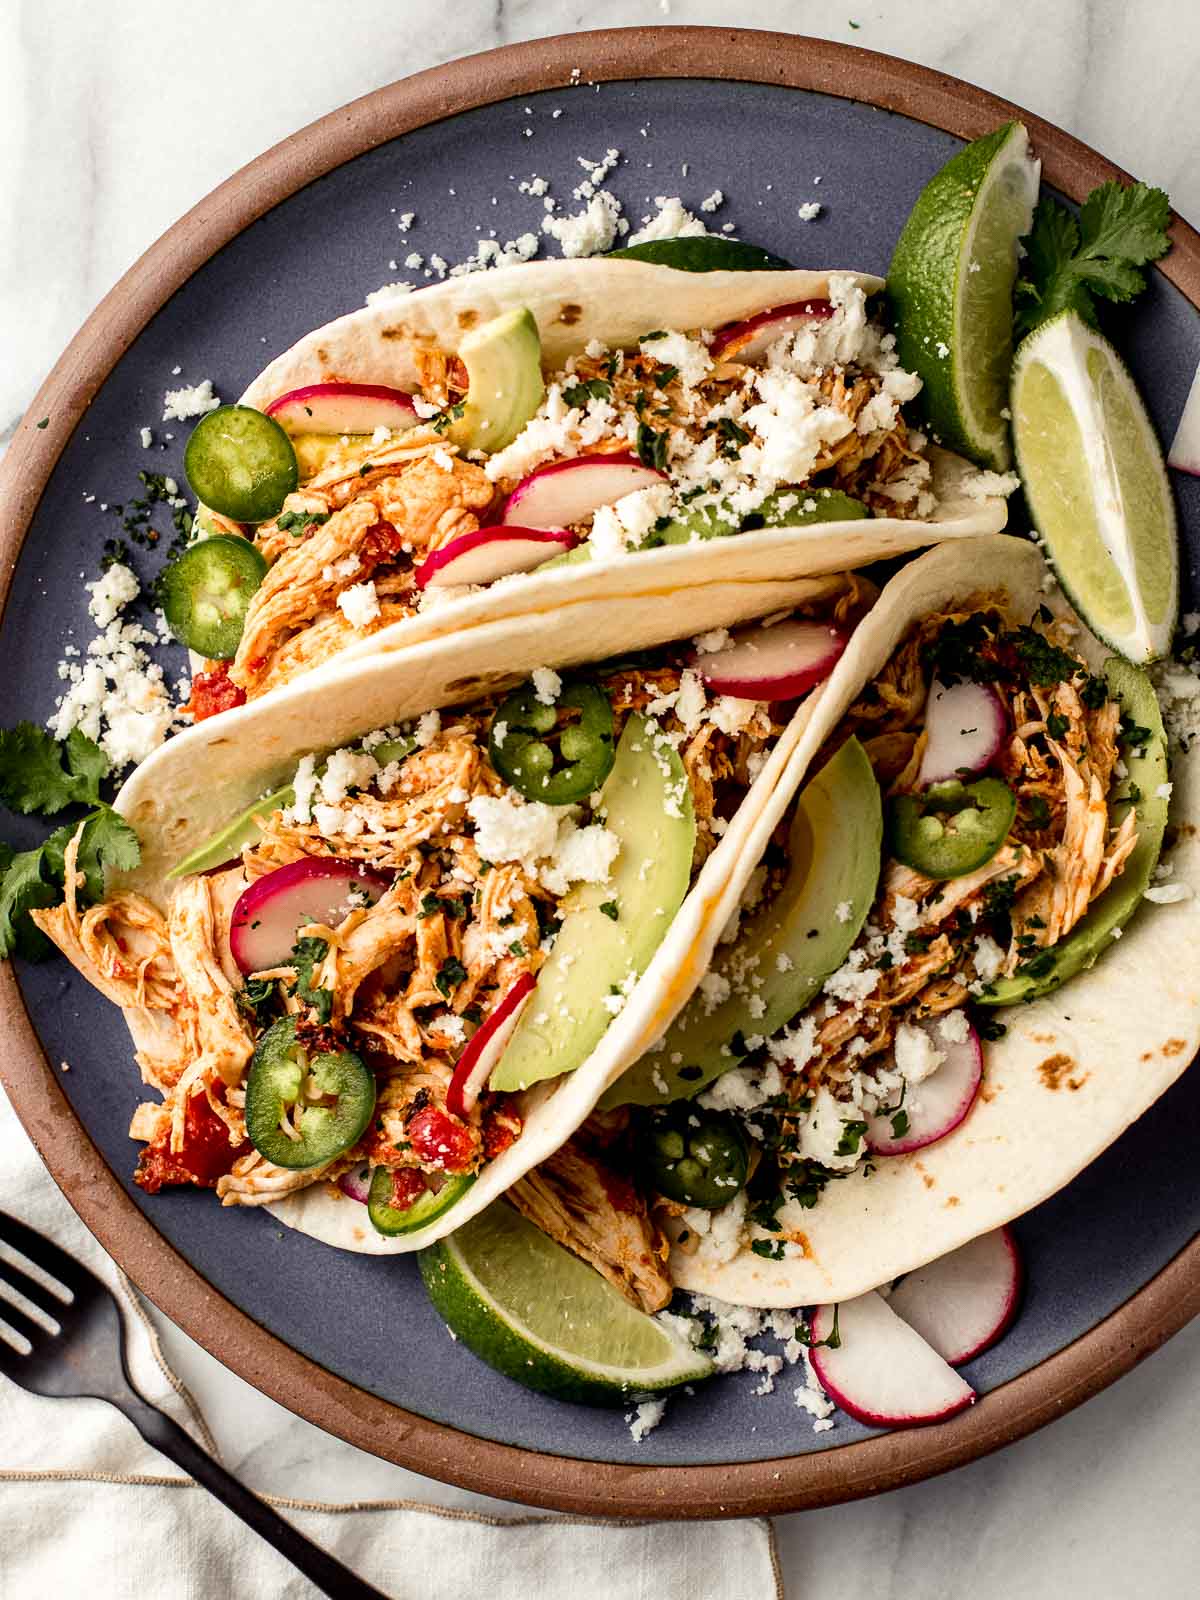 Chicken tacos on a plate.